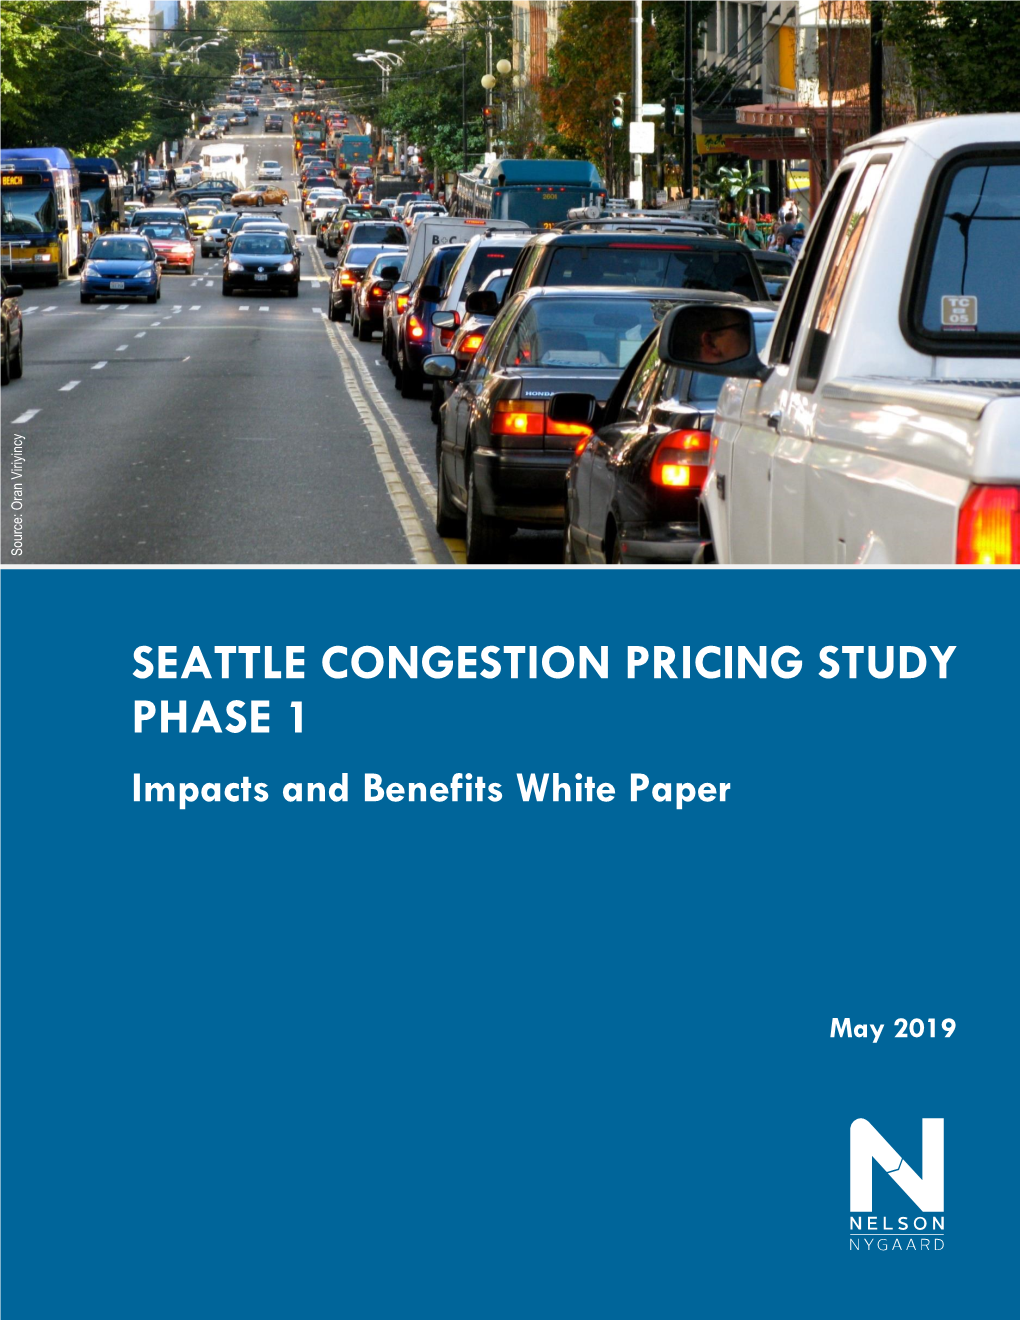 Seattle Congestion Pricing Phase 1 Impacts and Benefits White Paper